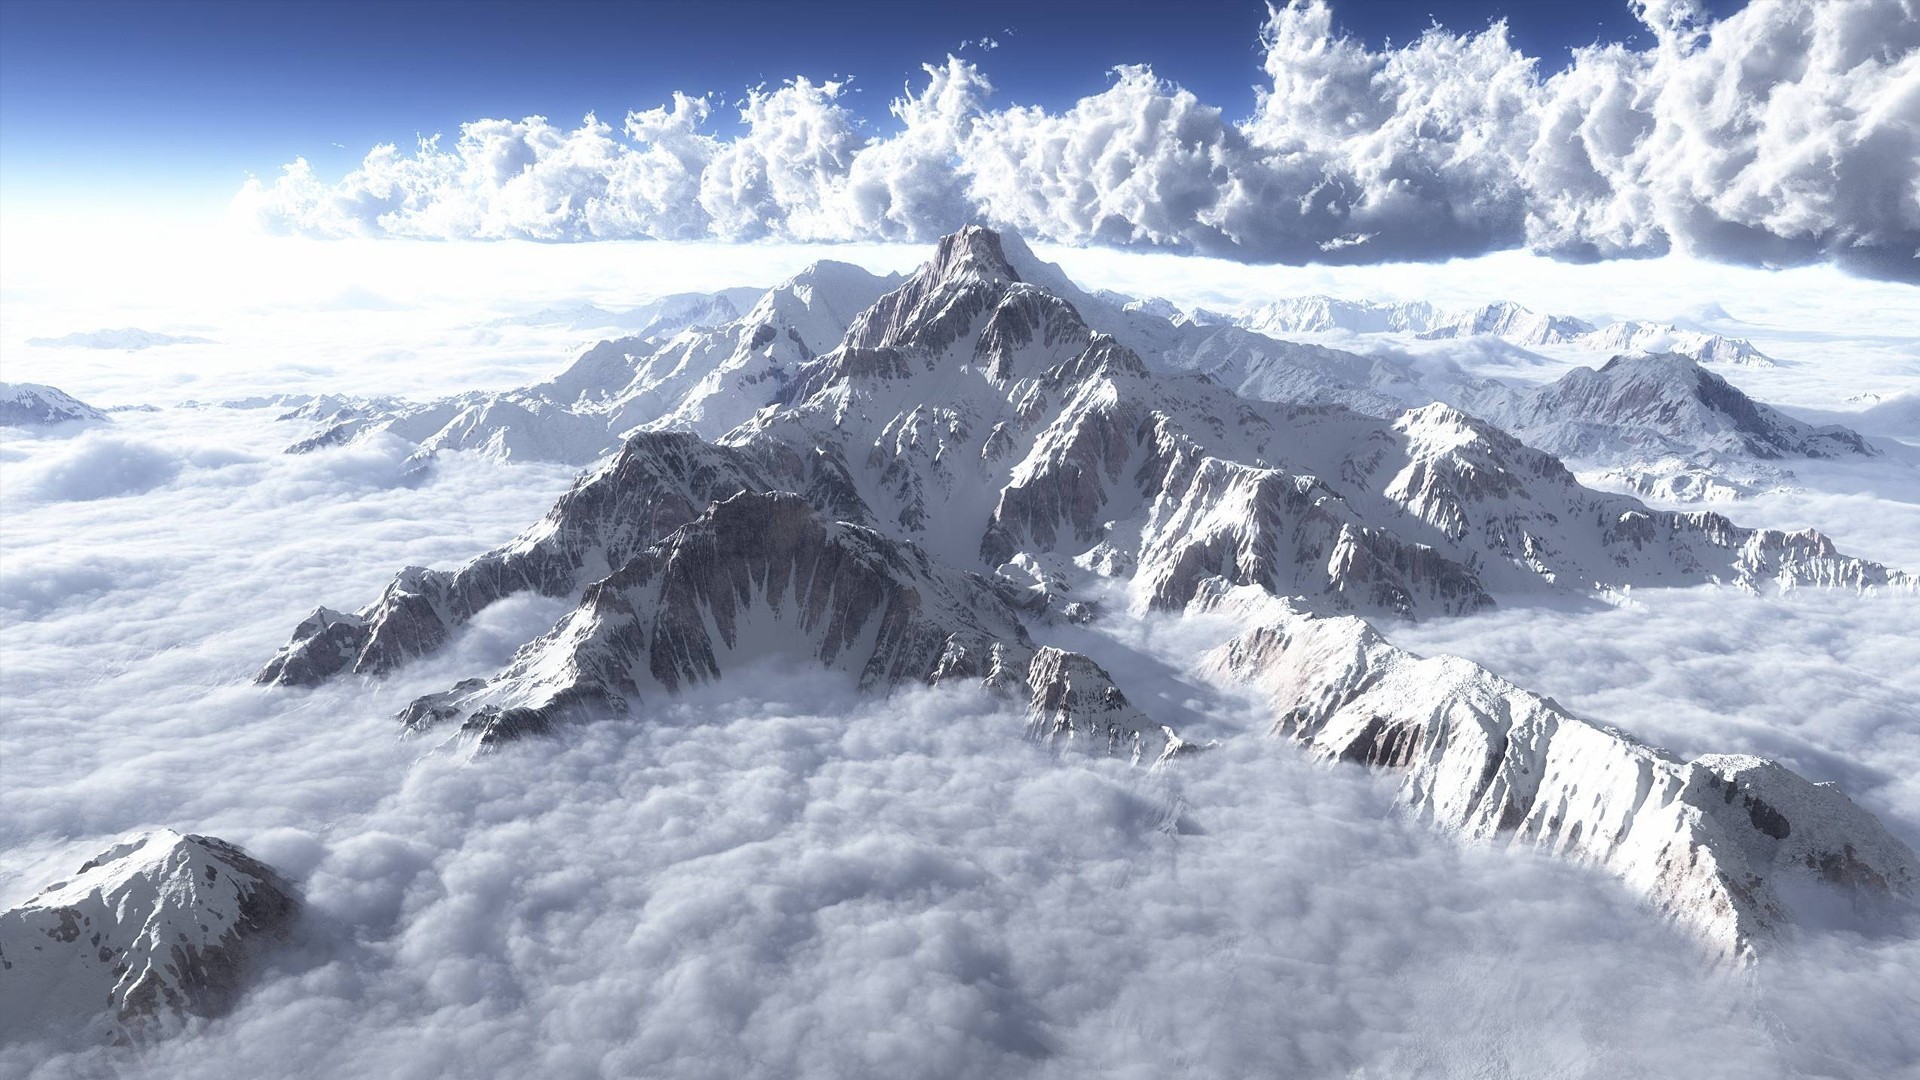 General 1920x1080 mountains clouds snow landscape nature snowy mountain snowy peak